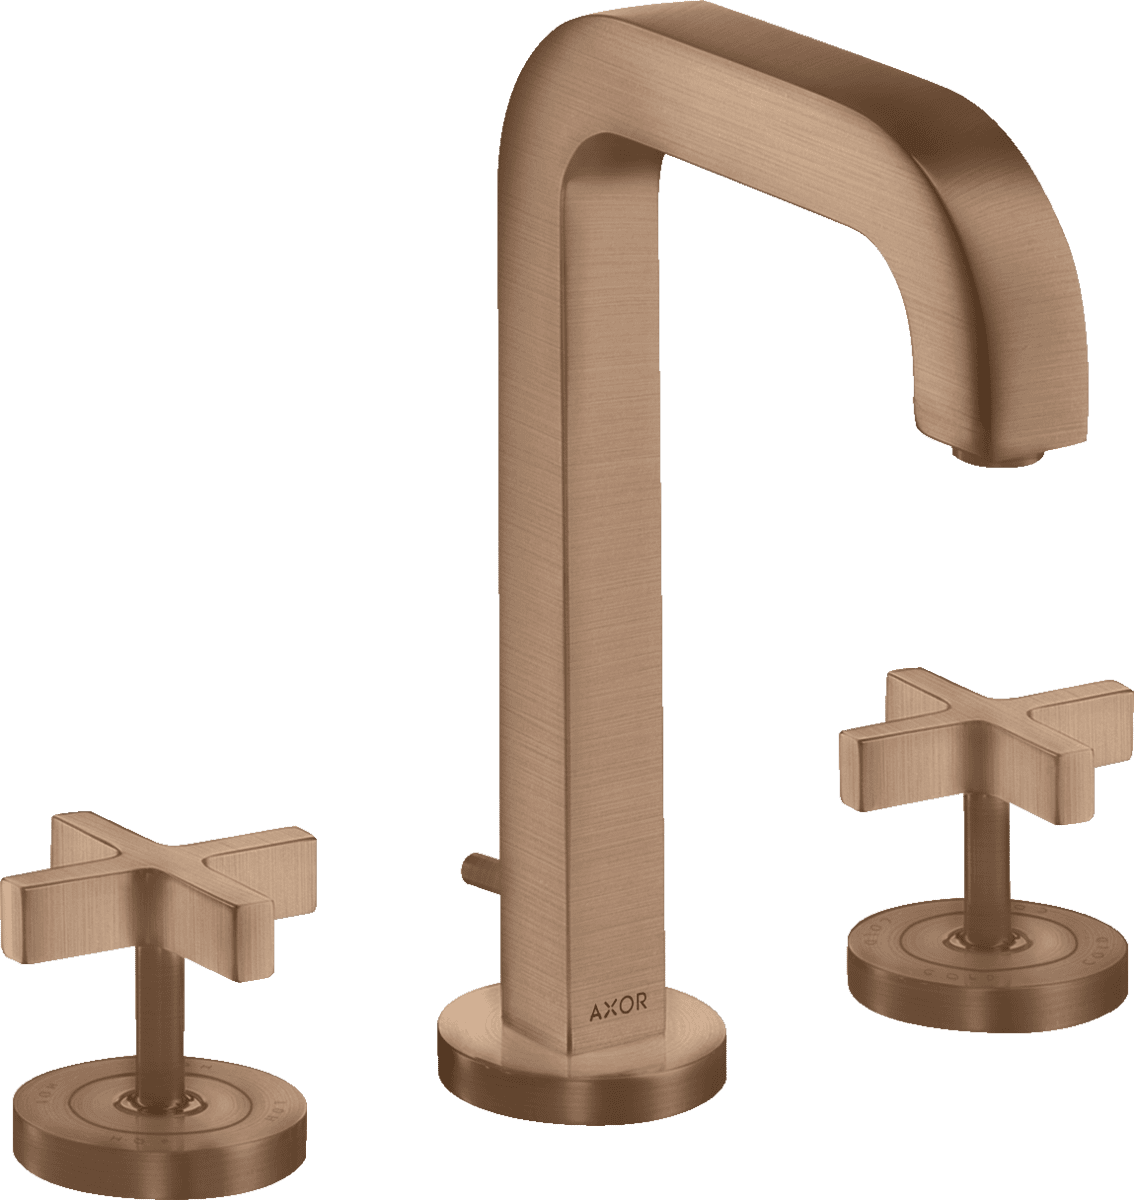 Picture of HANSGROHE AXOR Citterio 3-hole basin mixer 170 with spout 140 mm, cross handles, escutcheons and pop-up waste set #39133310 - Brushed Red Gold